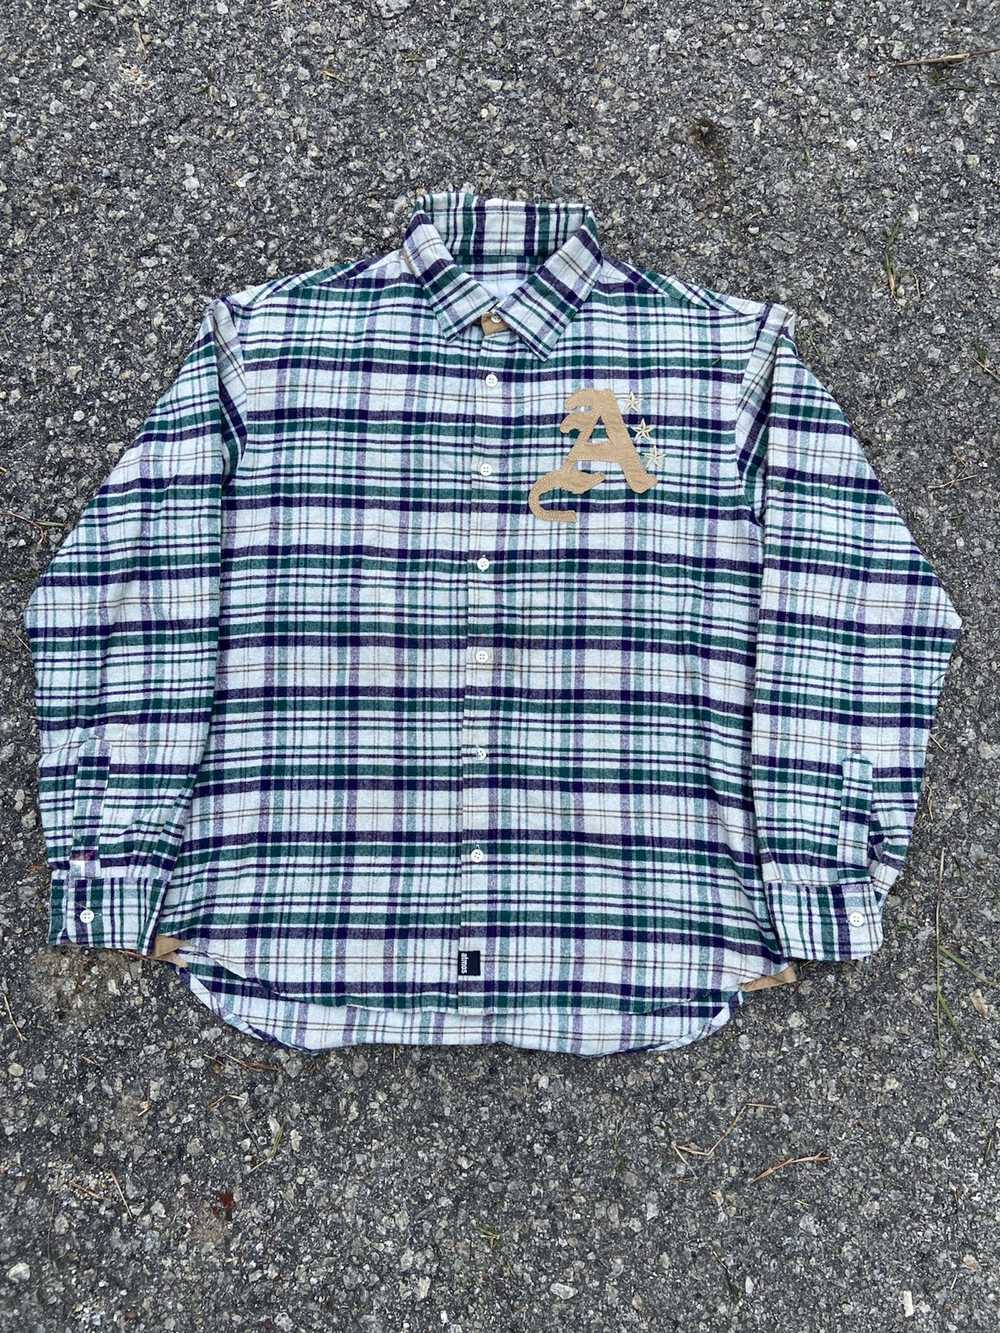 Atmos × Flannel × Japanese Brand Atmos Flannel Sh… - image 1